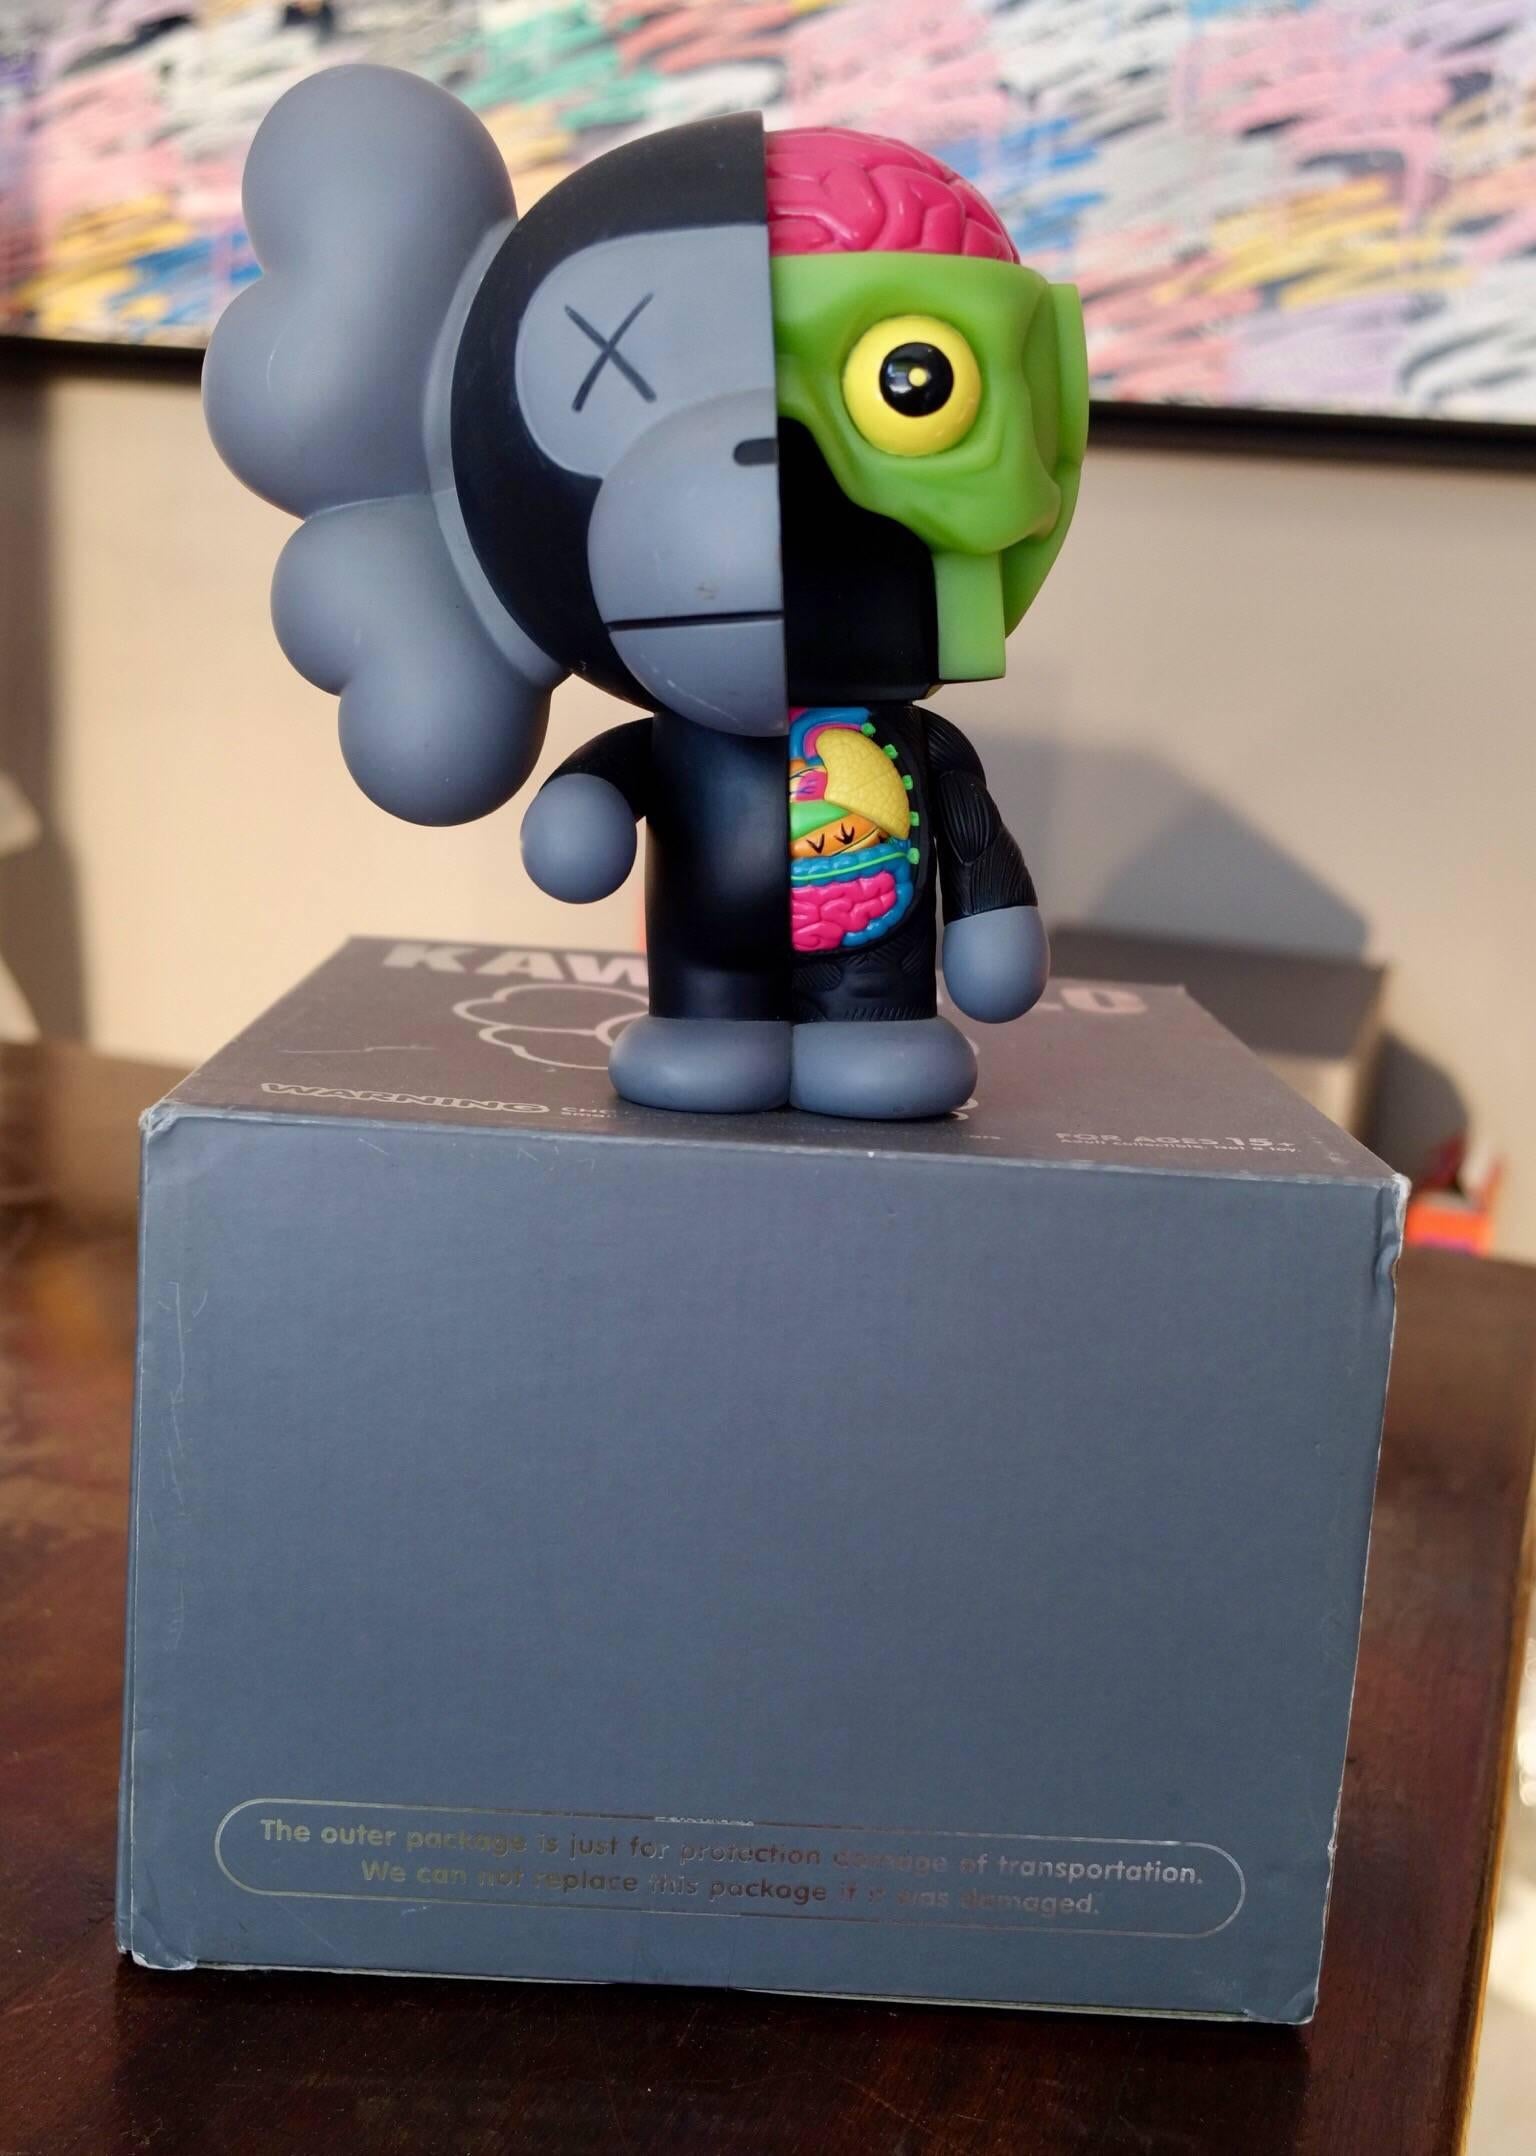 Kaws, Milo, 2011. 

Painted cast vinyl. 
In its original packaging / box. 
Produced and manufactured Medicom Toy, China.

“